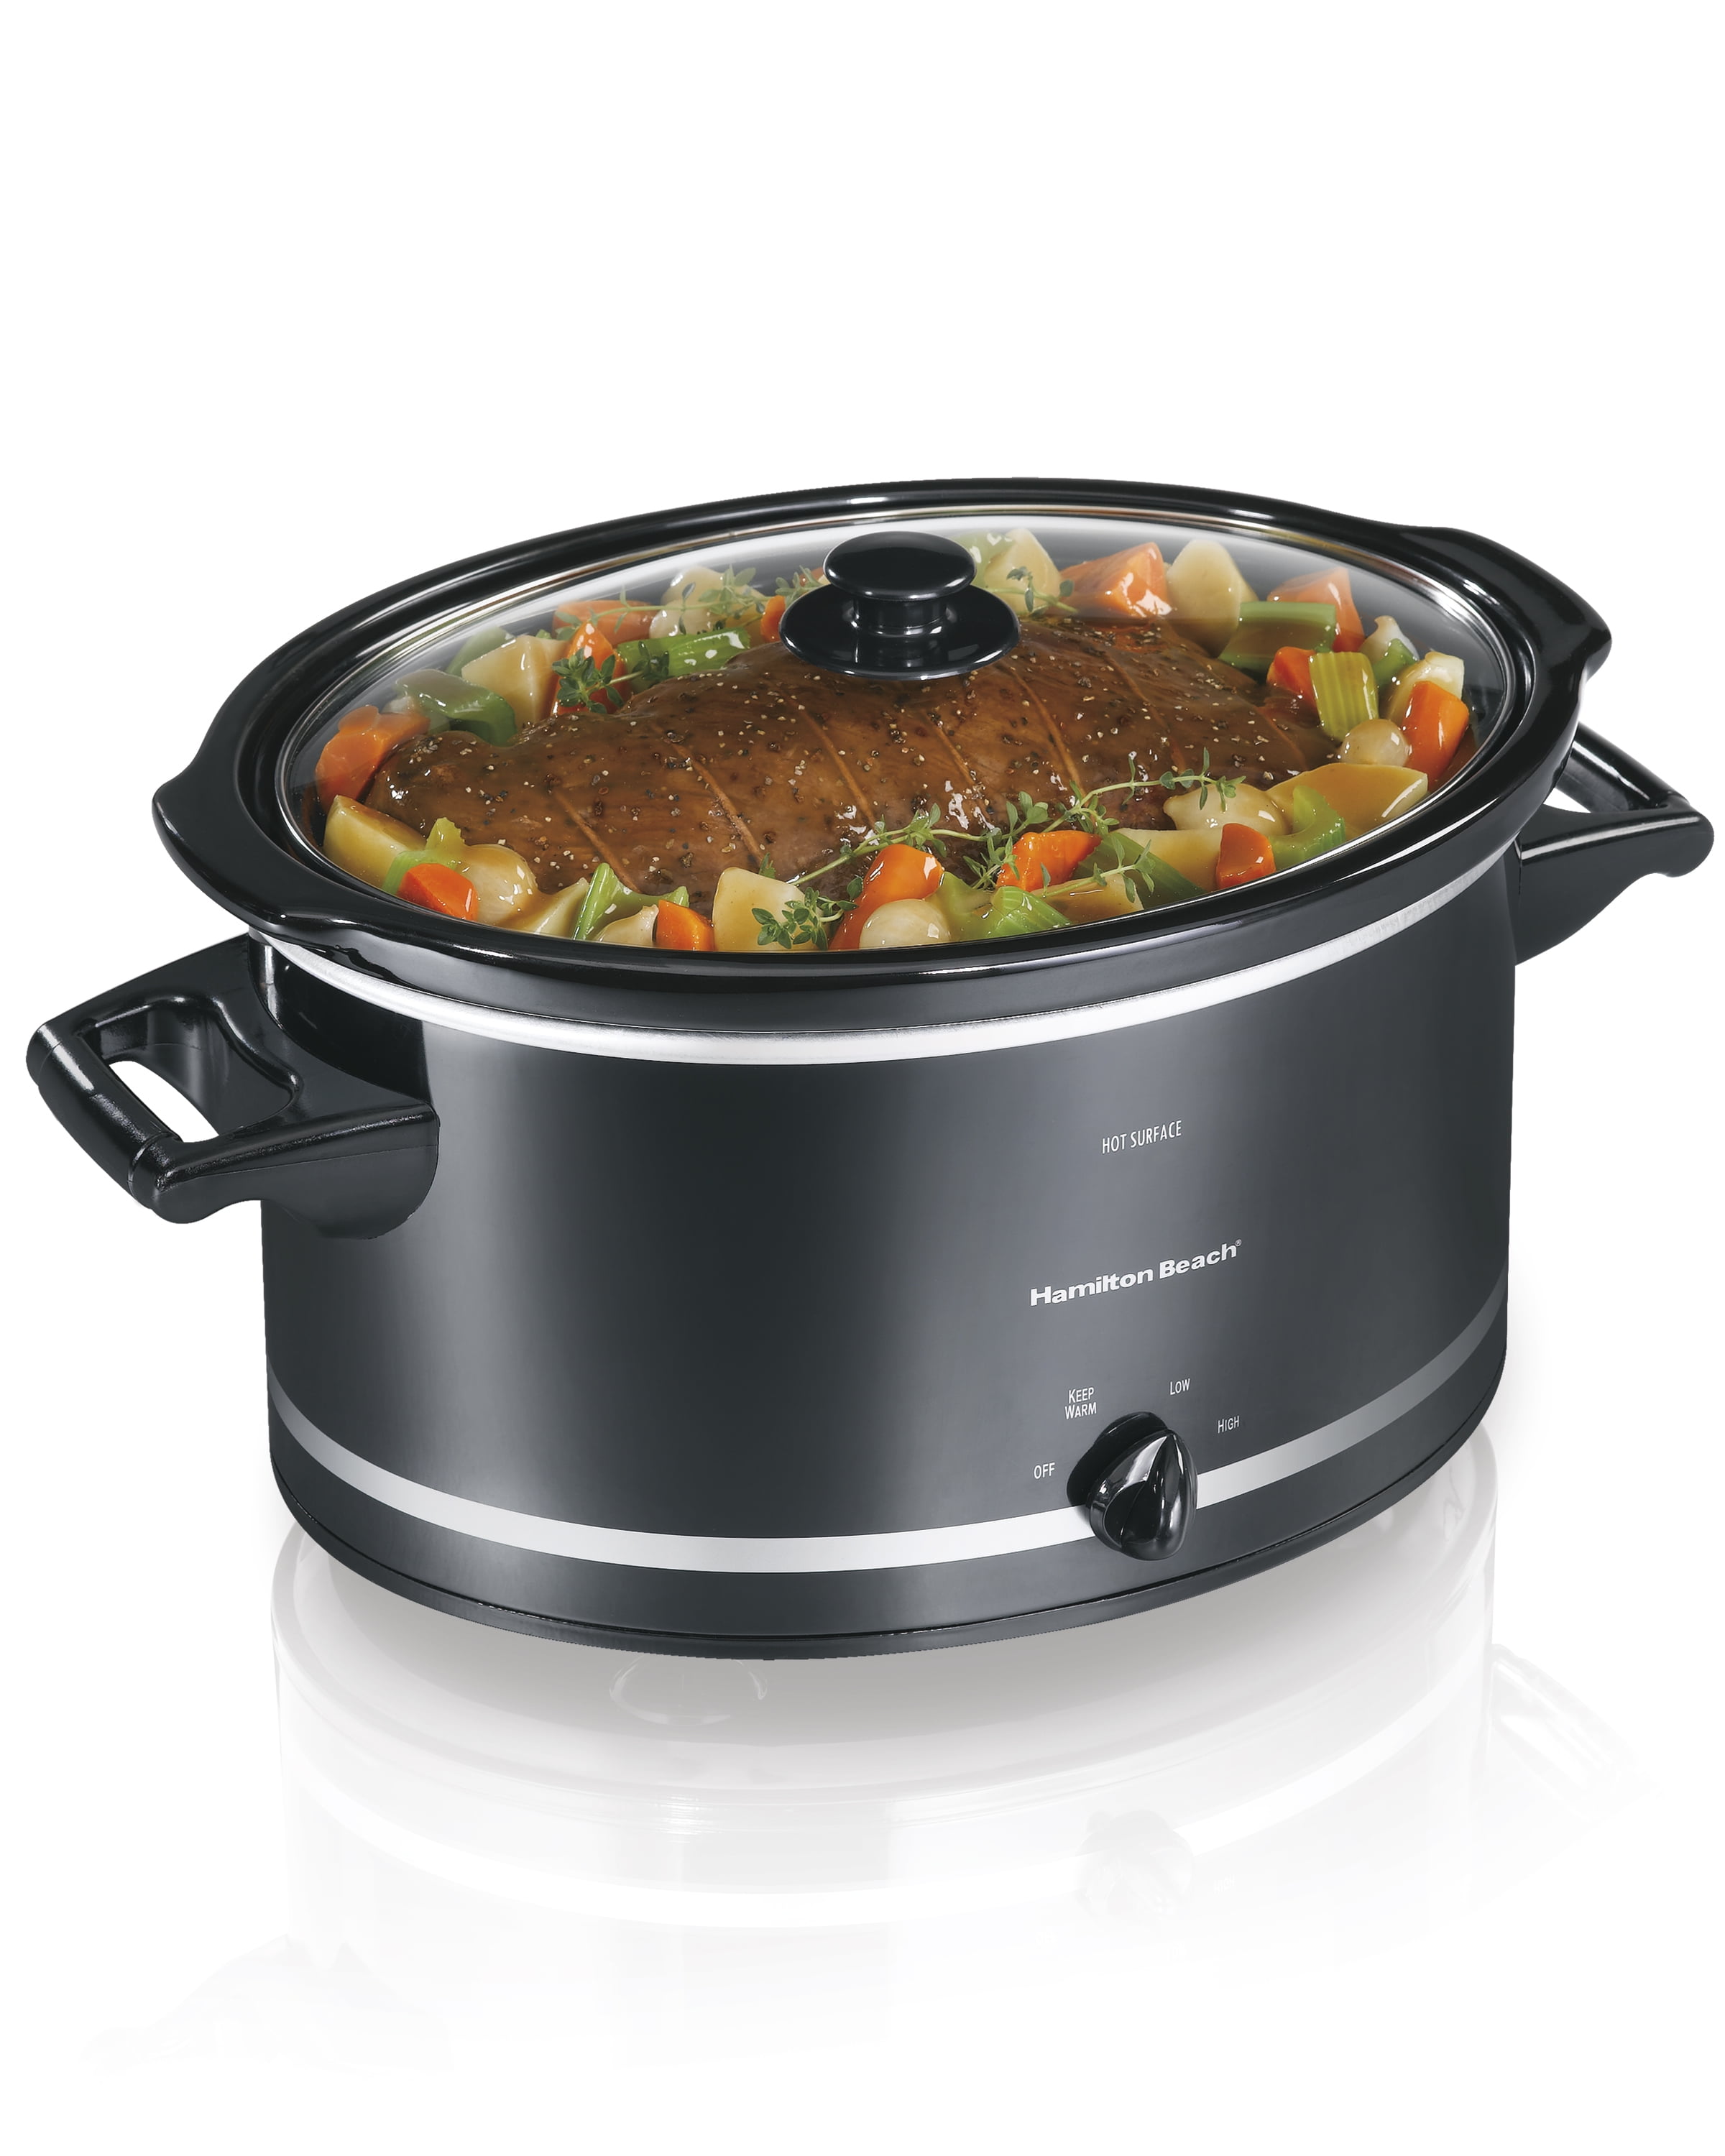 8-Quart Extra Large Slow Cooker - Fit a 6-pound Roast or 8-pound Chicken